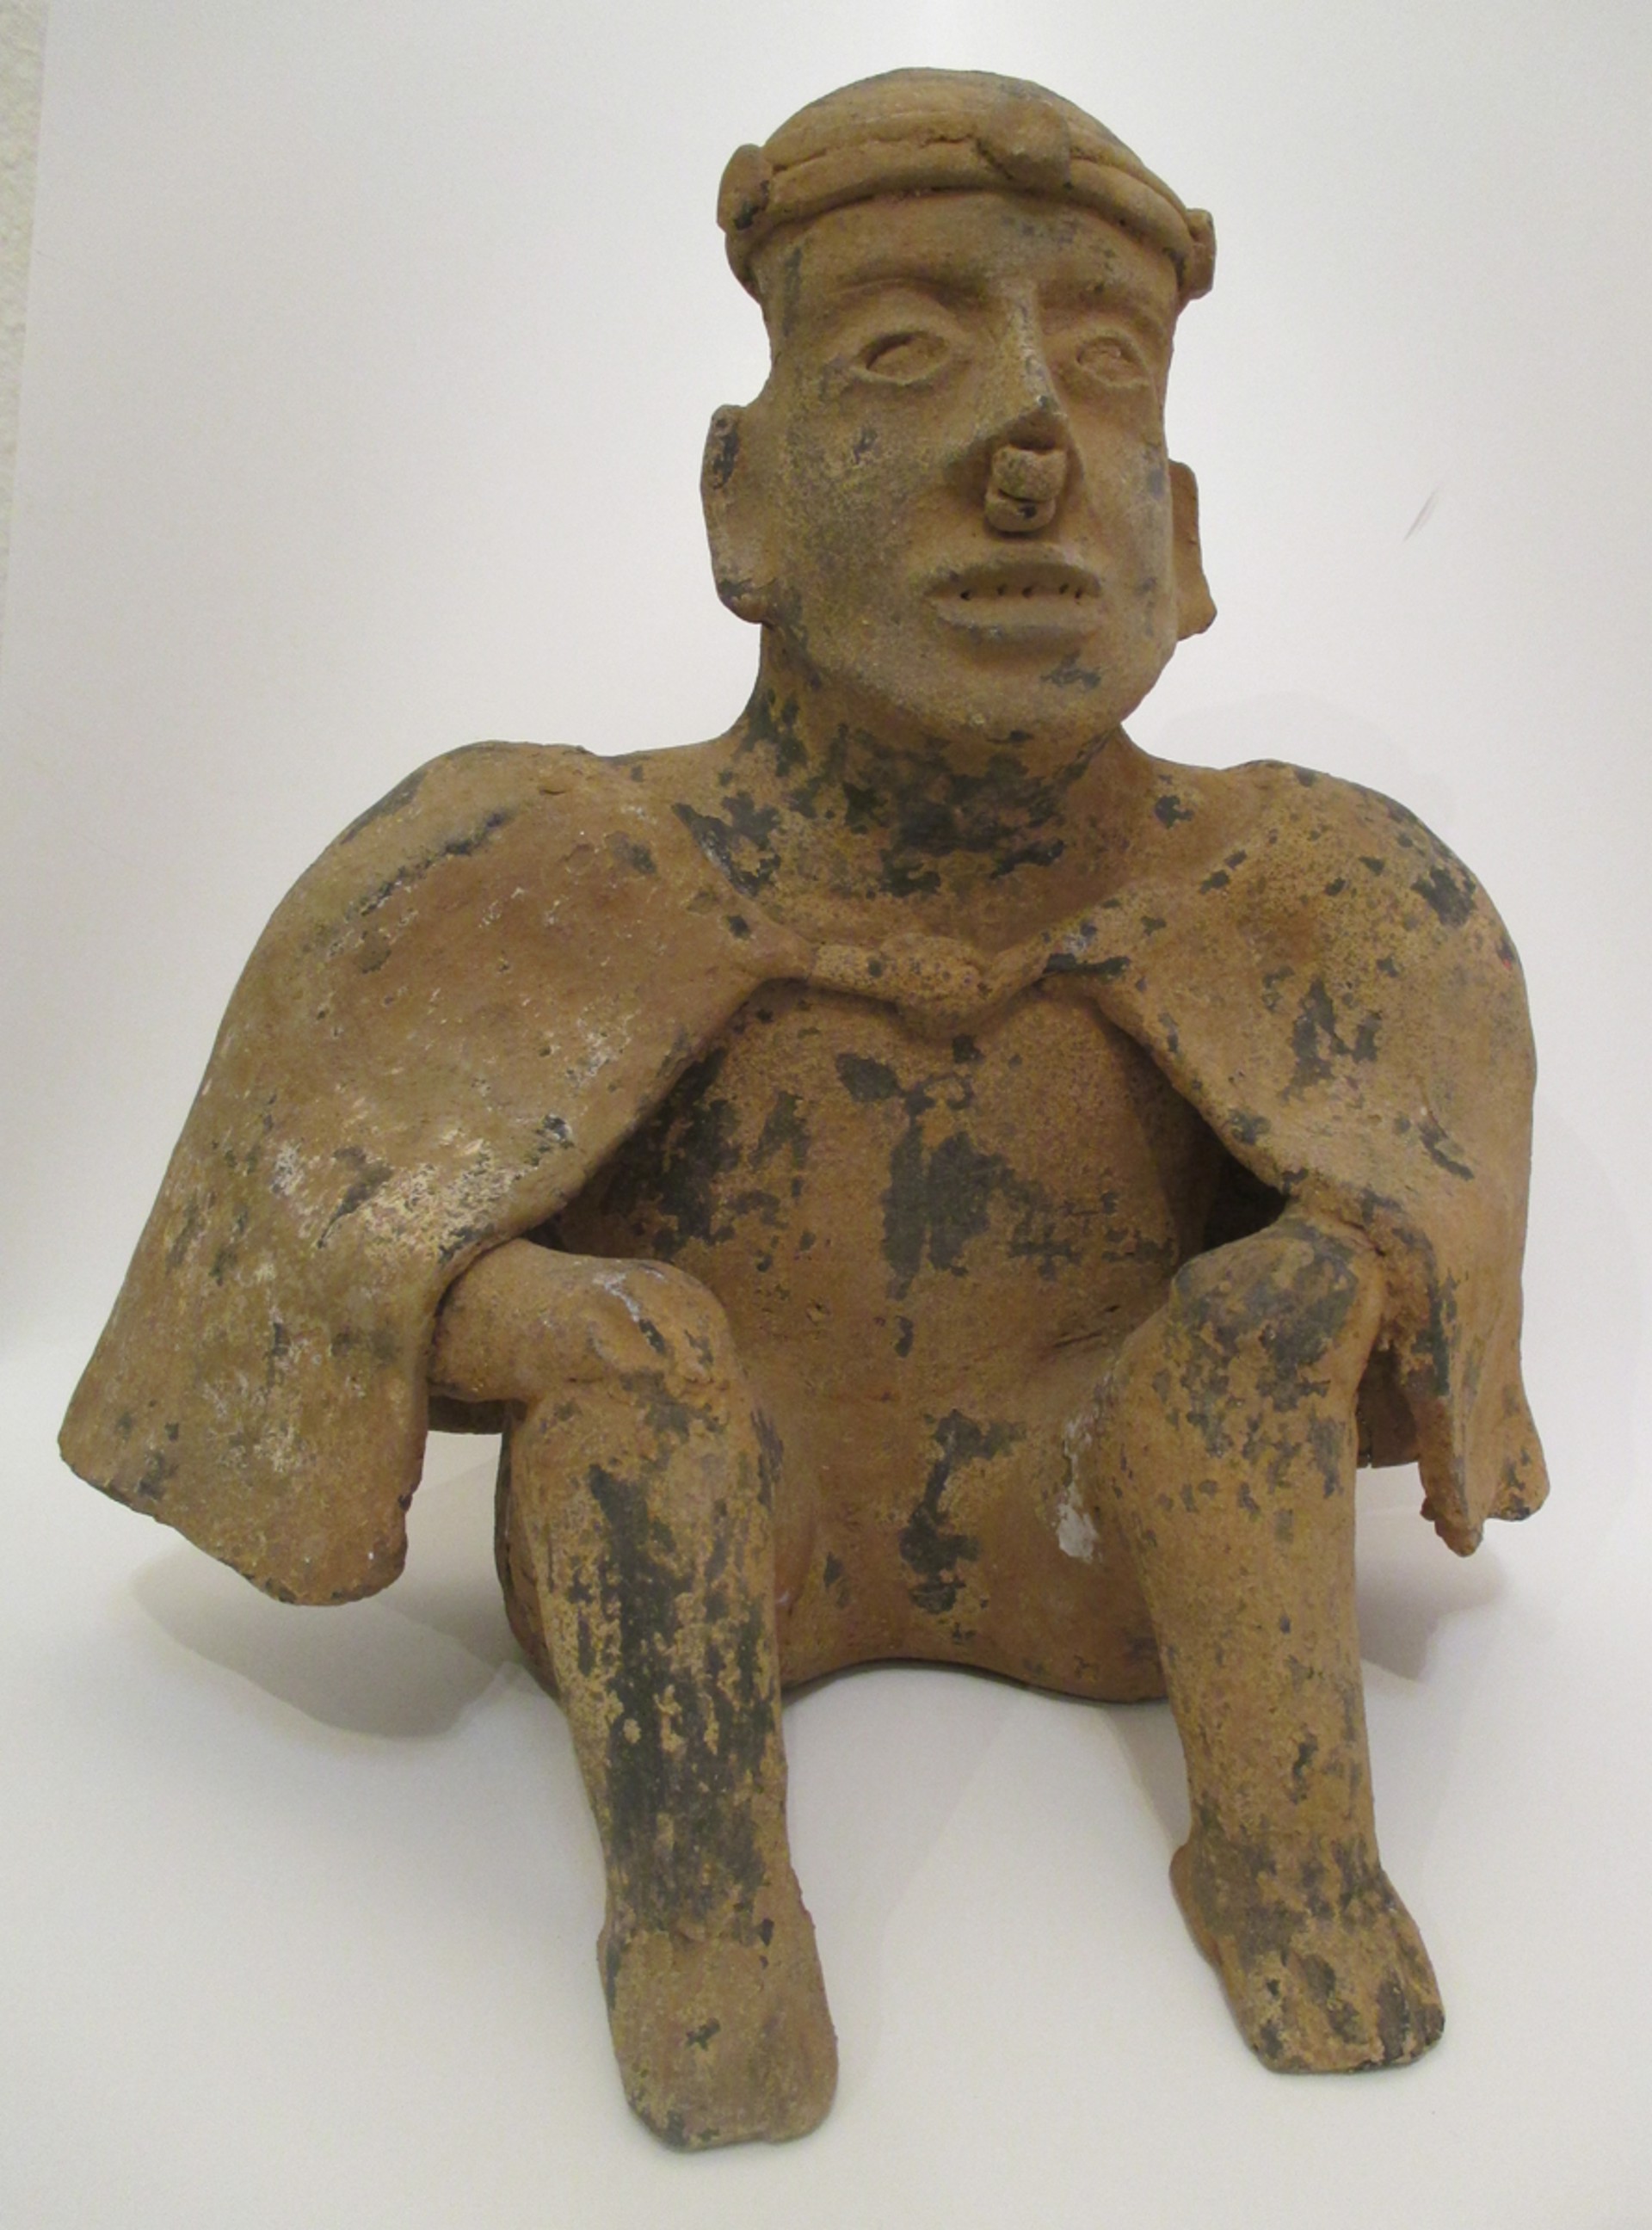 Caped Seated Figure  Nayarit 700 BC-300 AD by Pre Columbian